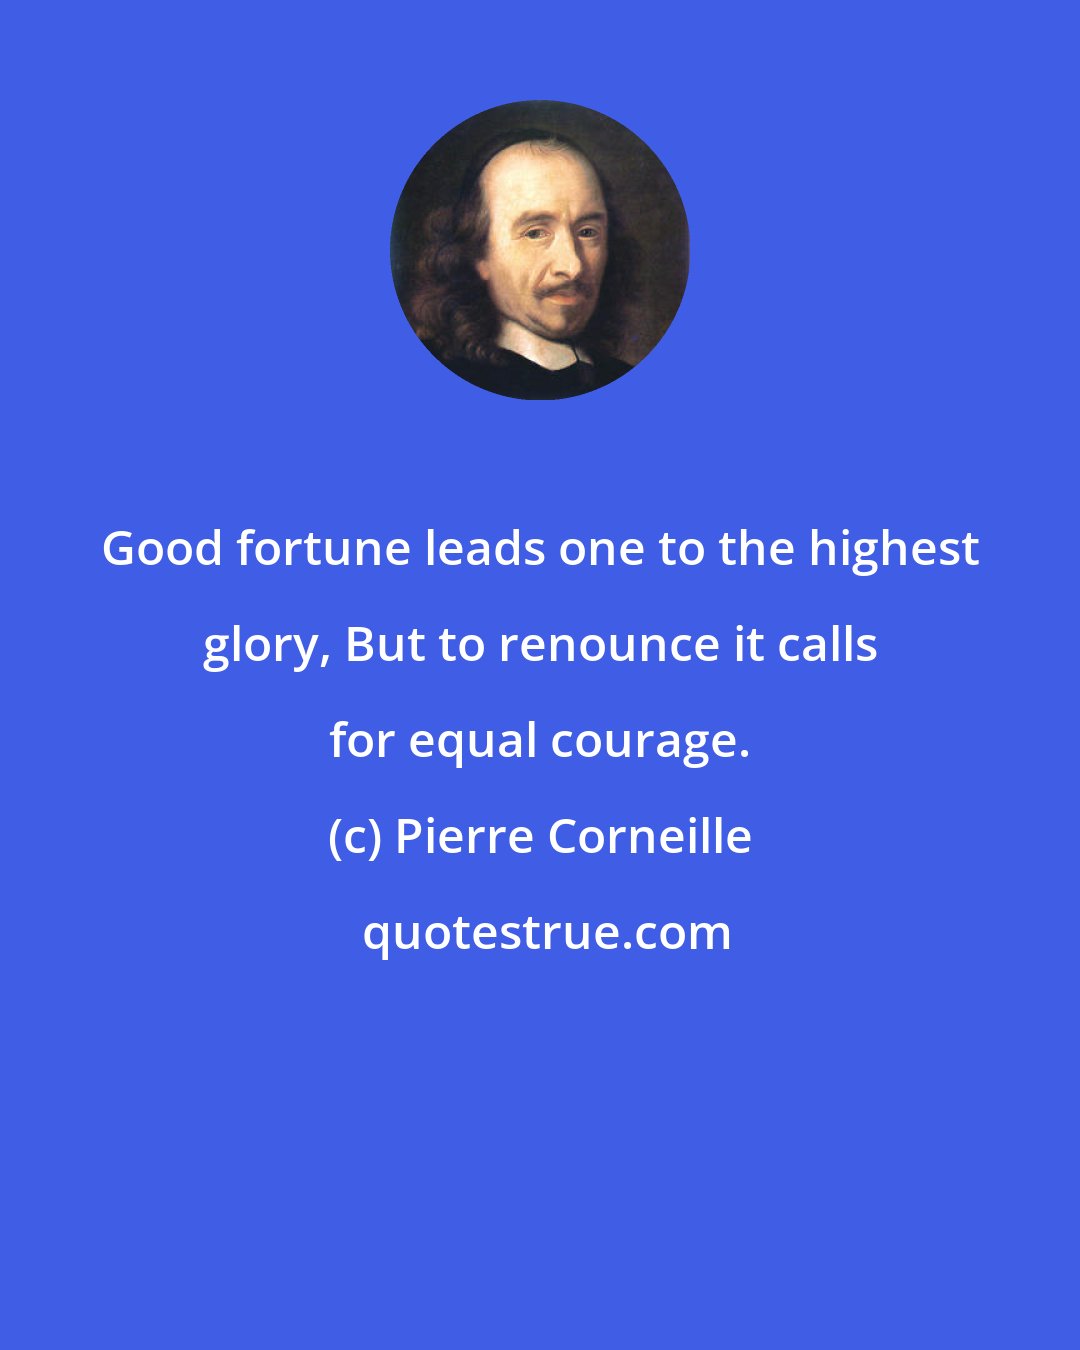 Pierre Corneille: Good fortune leads one to the highest glory, But to renounce it calls for equal courage.